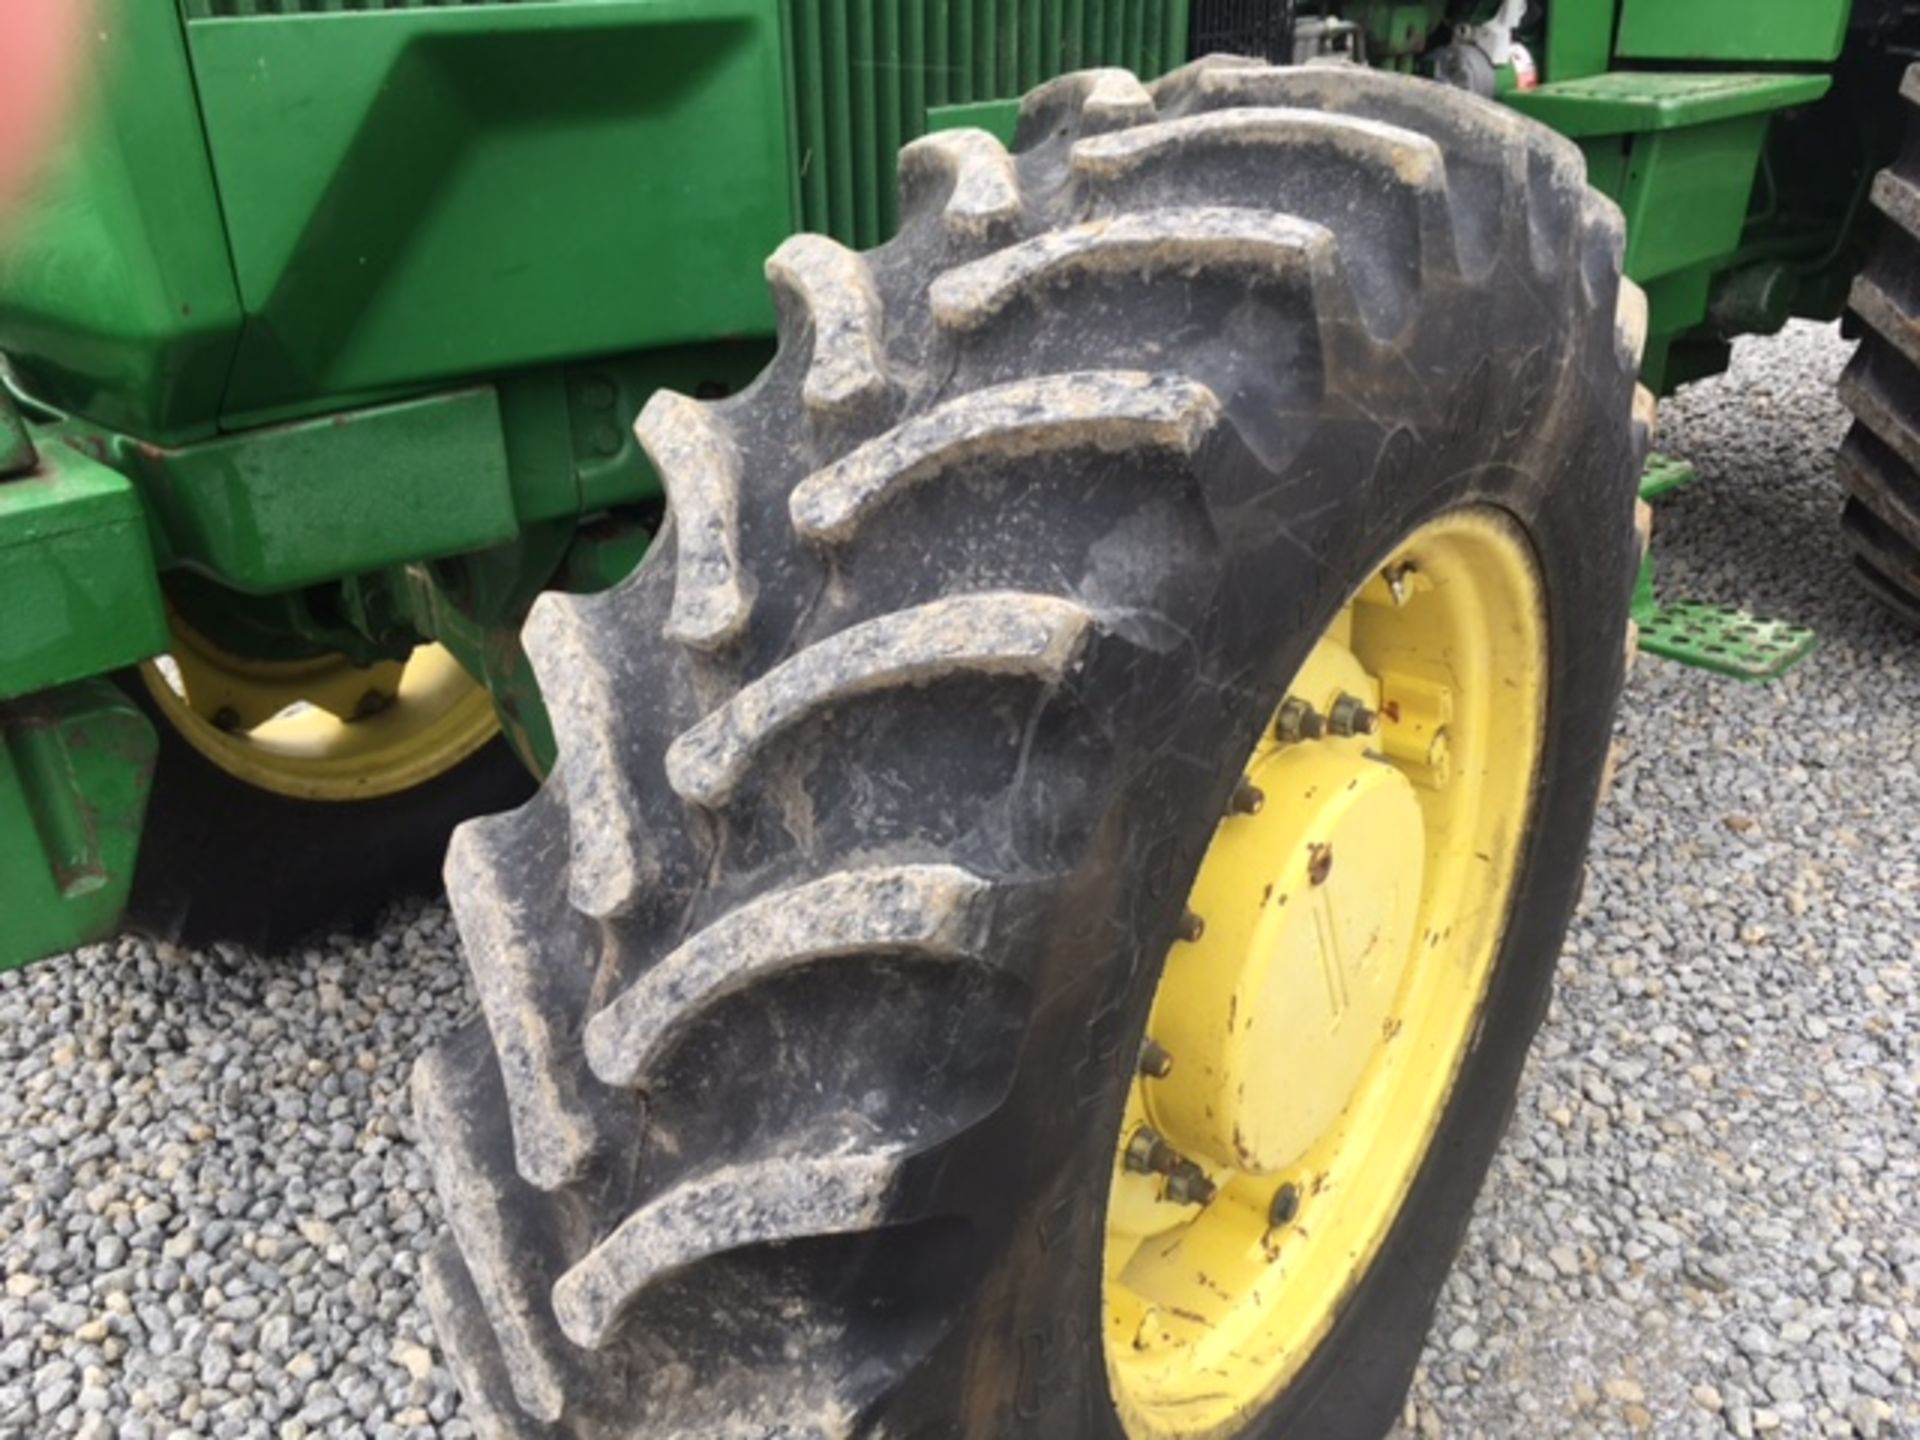 John Deere 4555 Tractor, MFWD, weights, duals, 15 speed powershift, 3pt., 3 hyd. remotes, big 1000 - Image 2 of 13